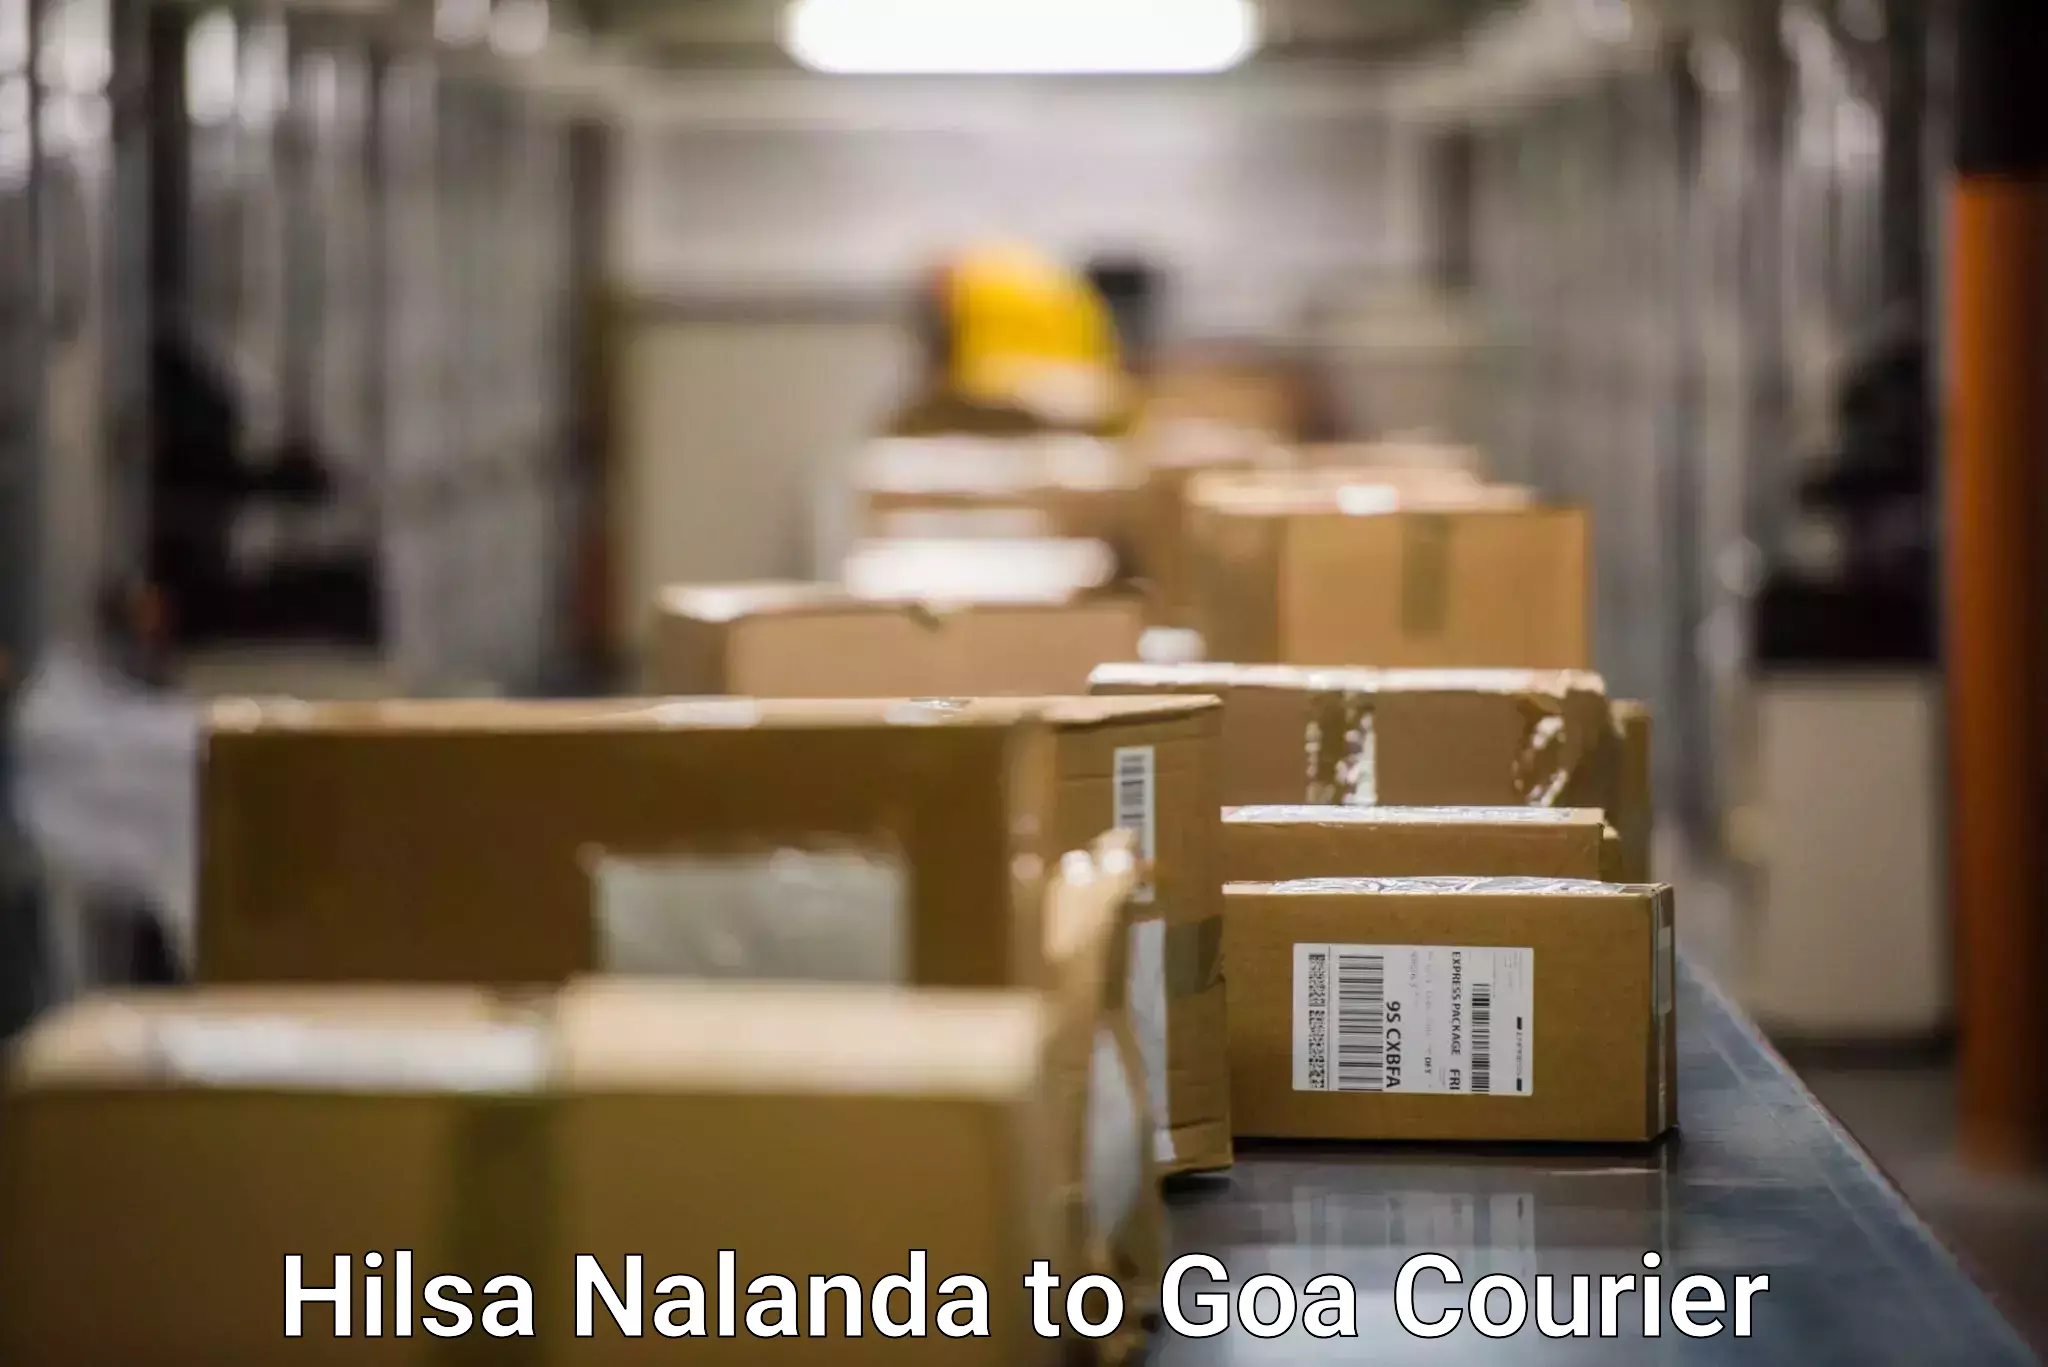 Sustainable delivery practices Hilsa Nalanda to Goa